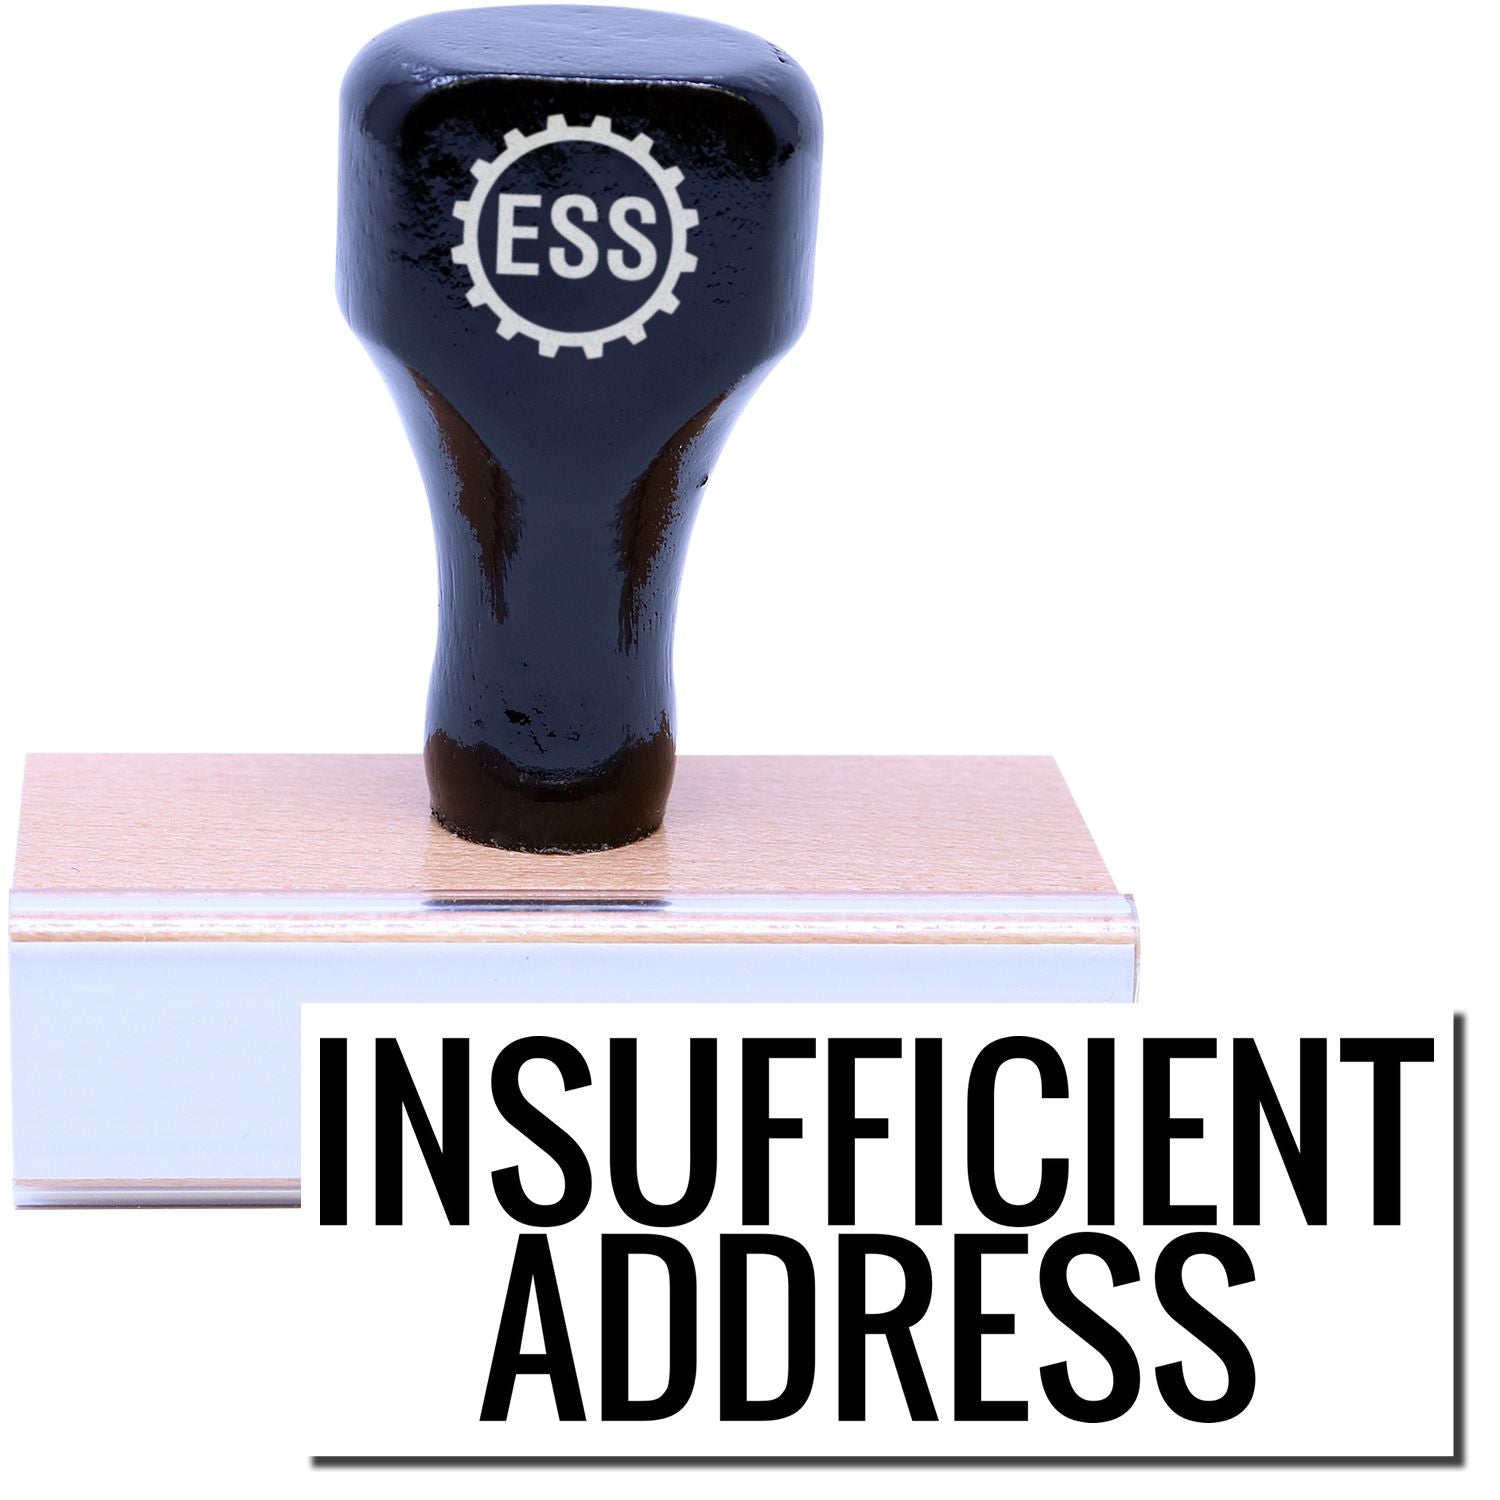 A stock office rubber stamp with a stamped image showing how the text "INSUFFICIENT ADDRESS" is displayed after stamping.